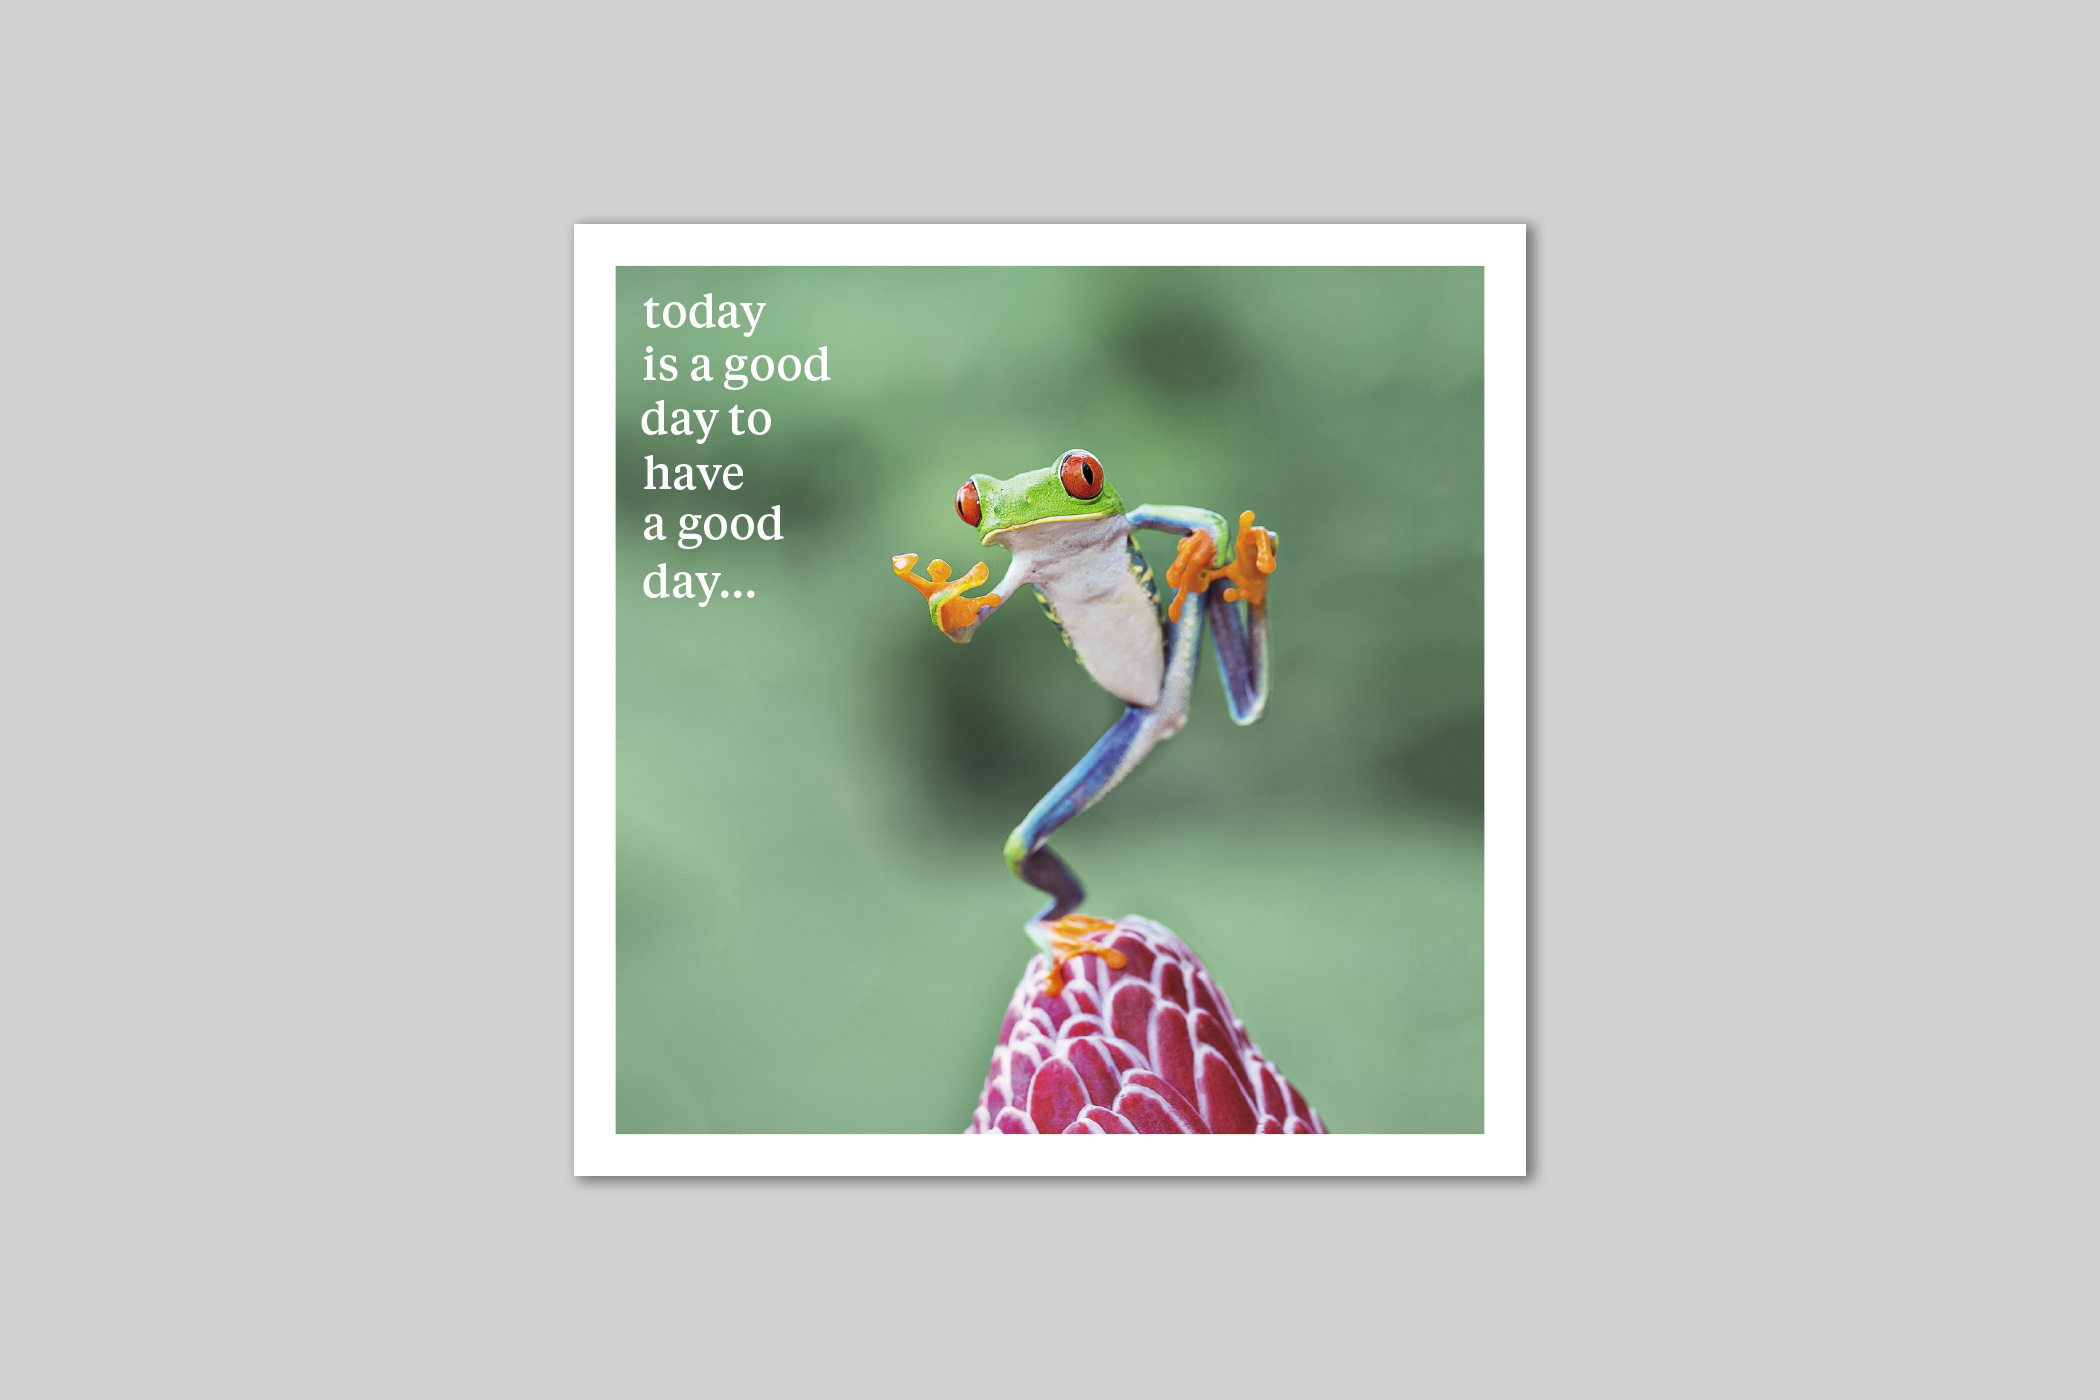 Have A Good Day quirky animal portrait from Curious World range of greeting cards by Icon.